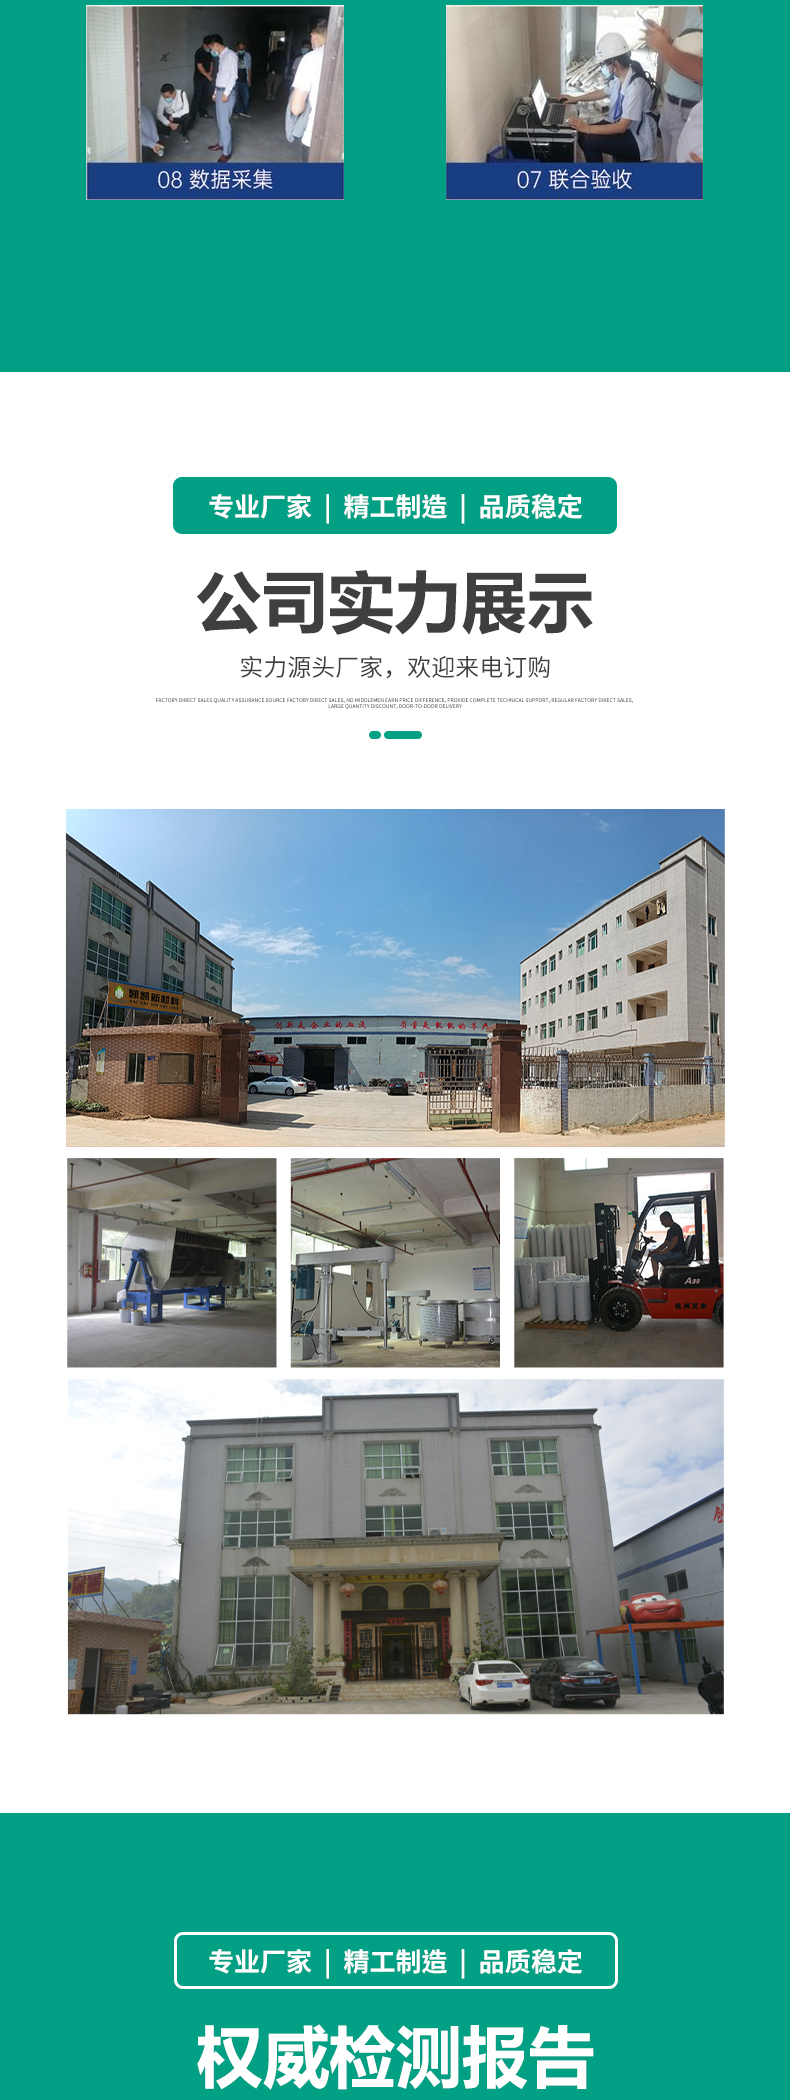 Sound insulation coating, floor, ground, shock absorption, noise reduction, building sound absorption and insulation, new water-based coating, leveling and damping